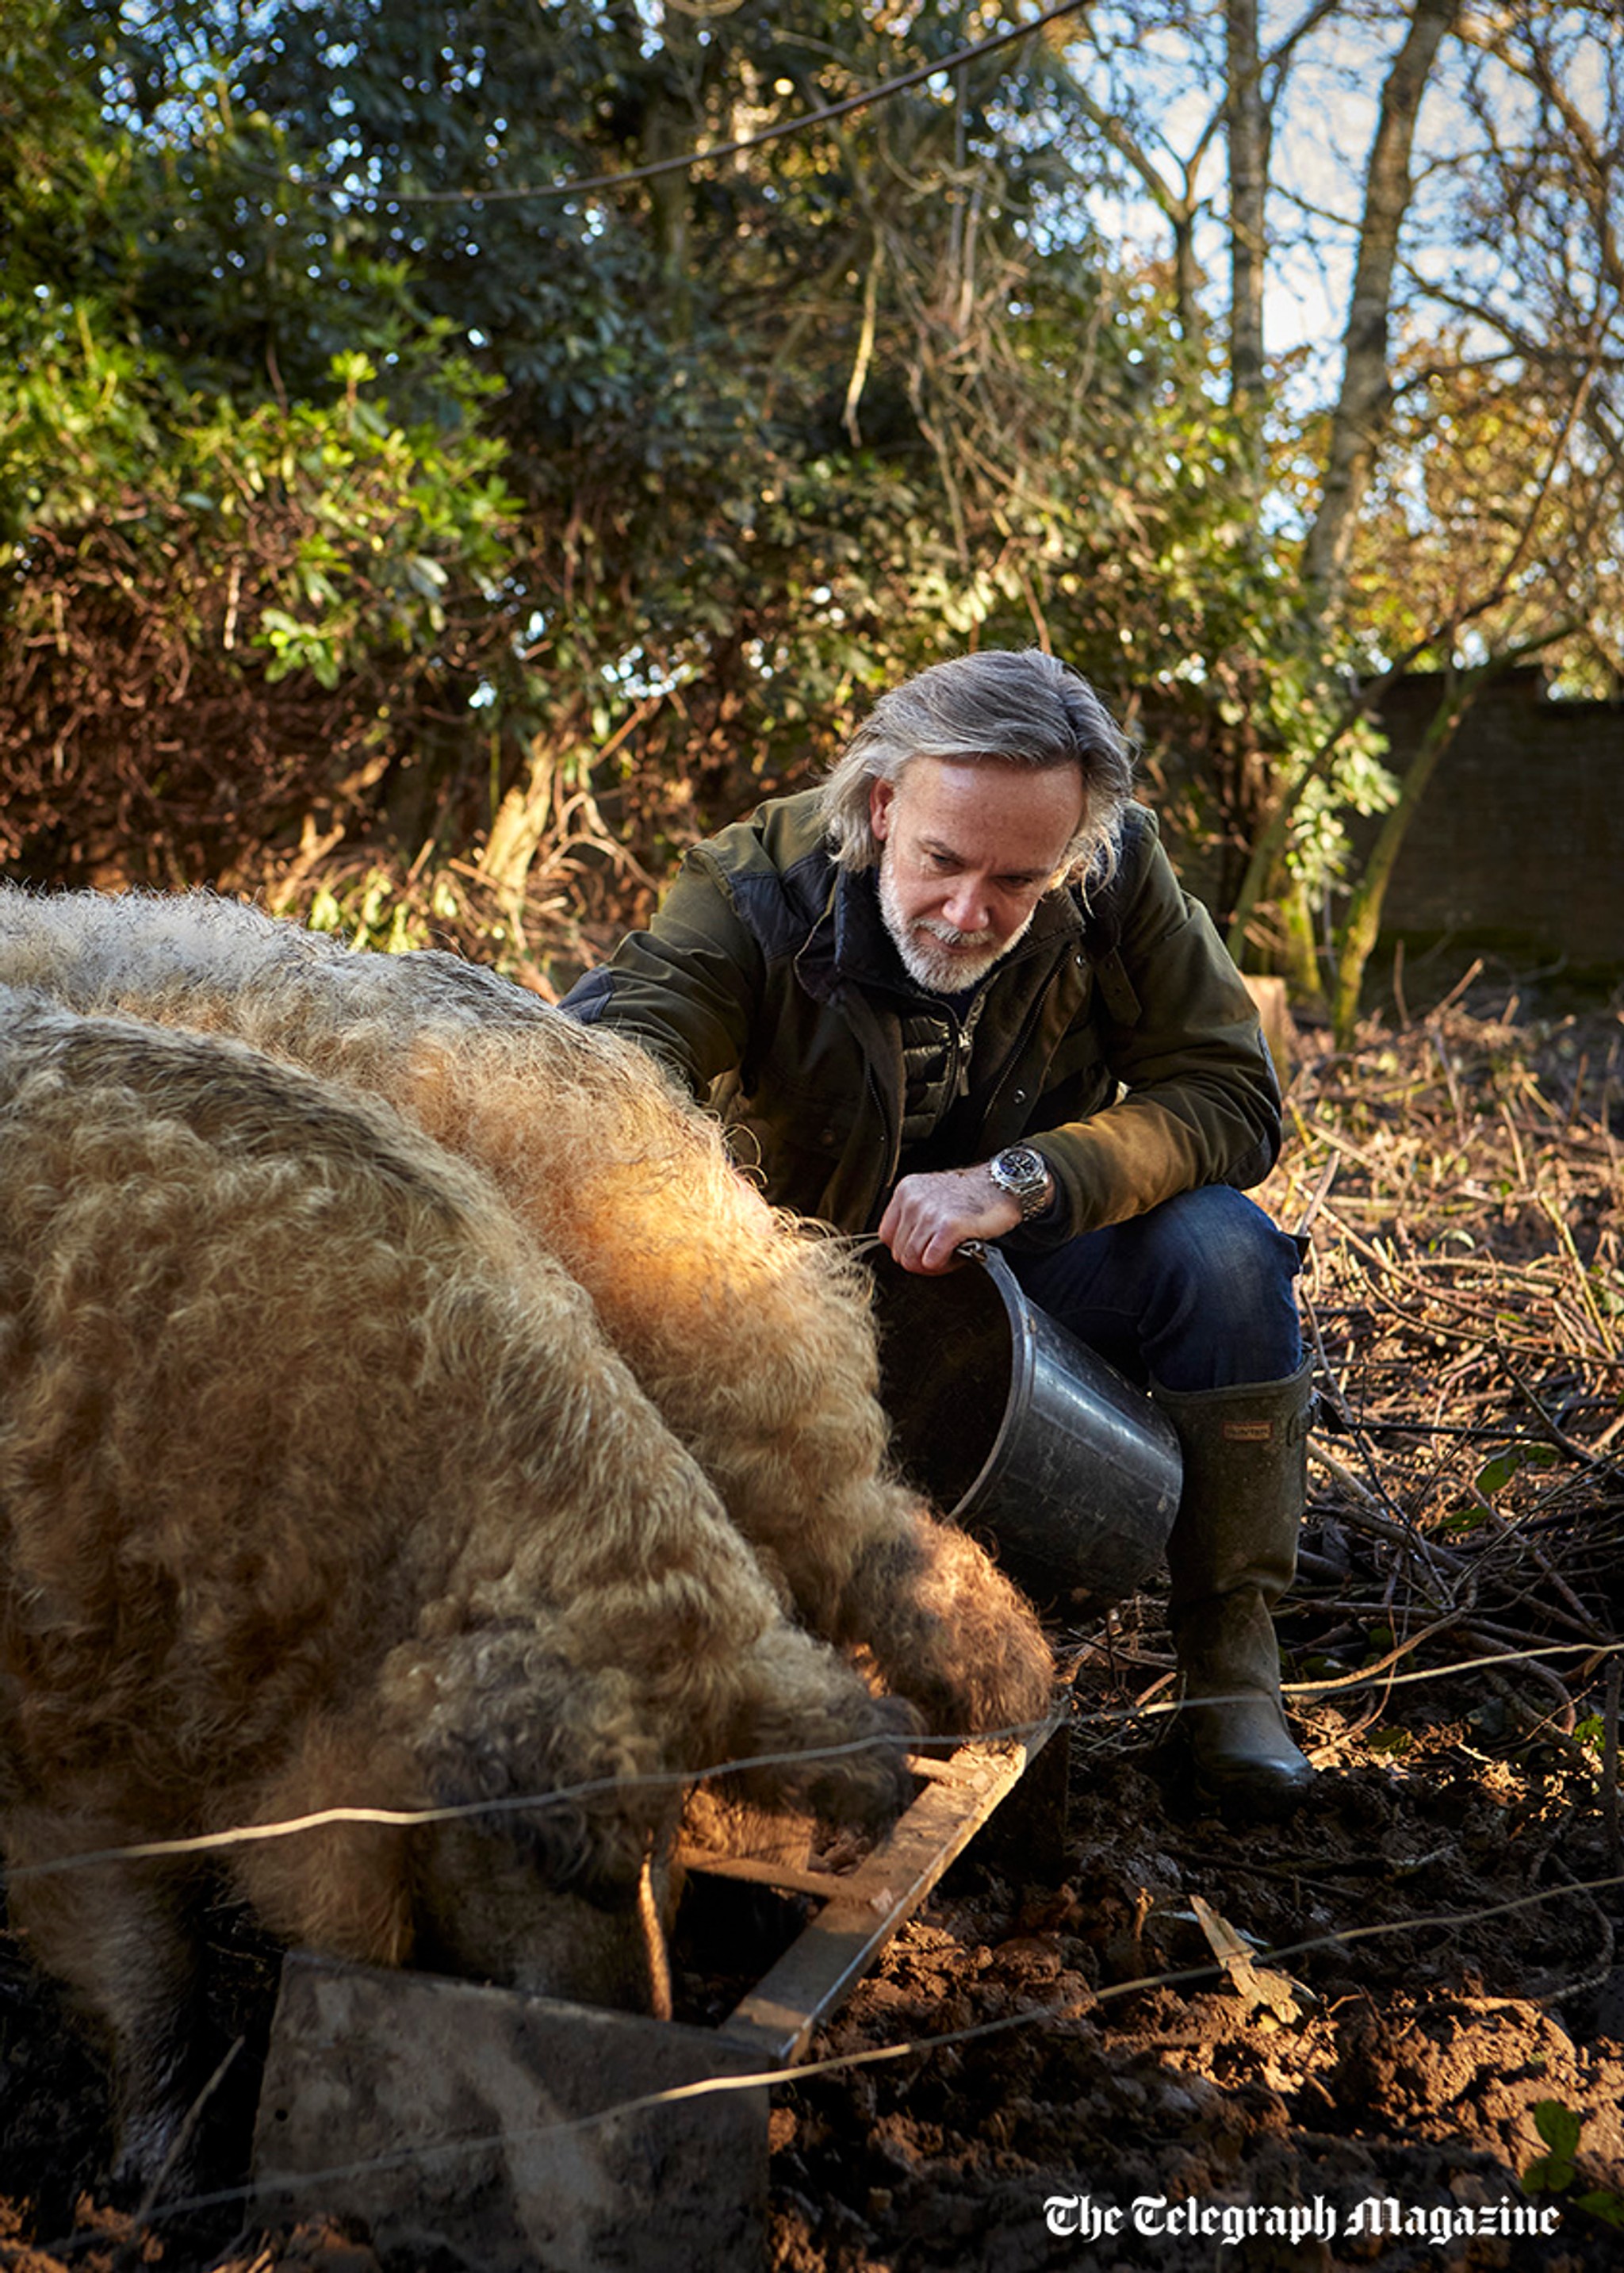 Marcus Wareing with two Mangalitza pigs on his farm in East Sussex